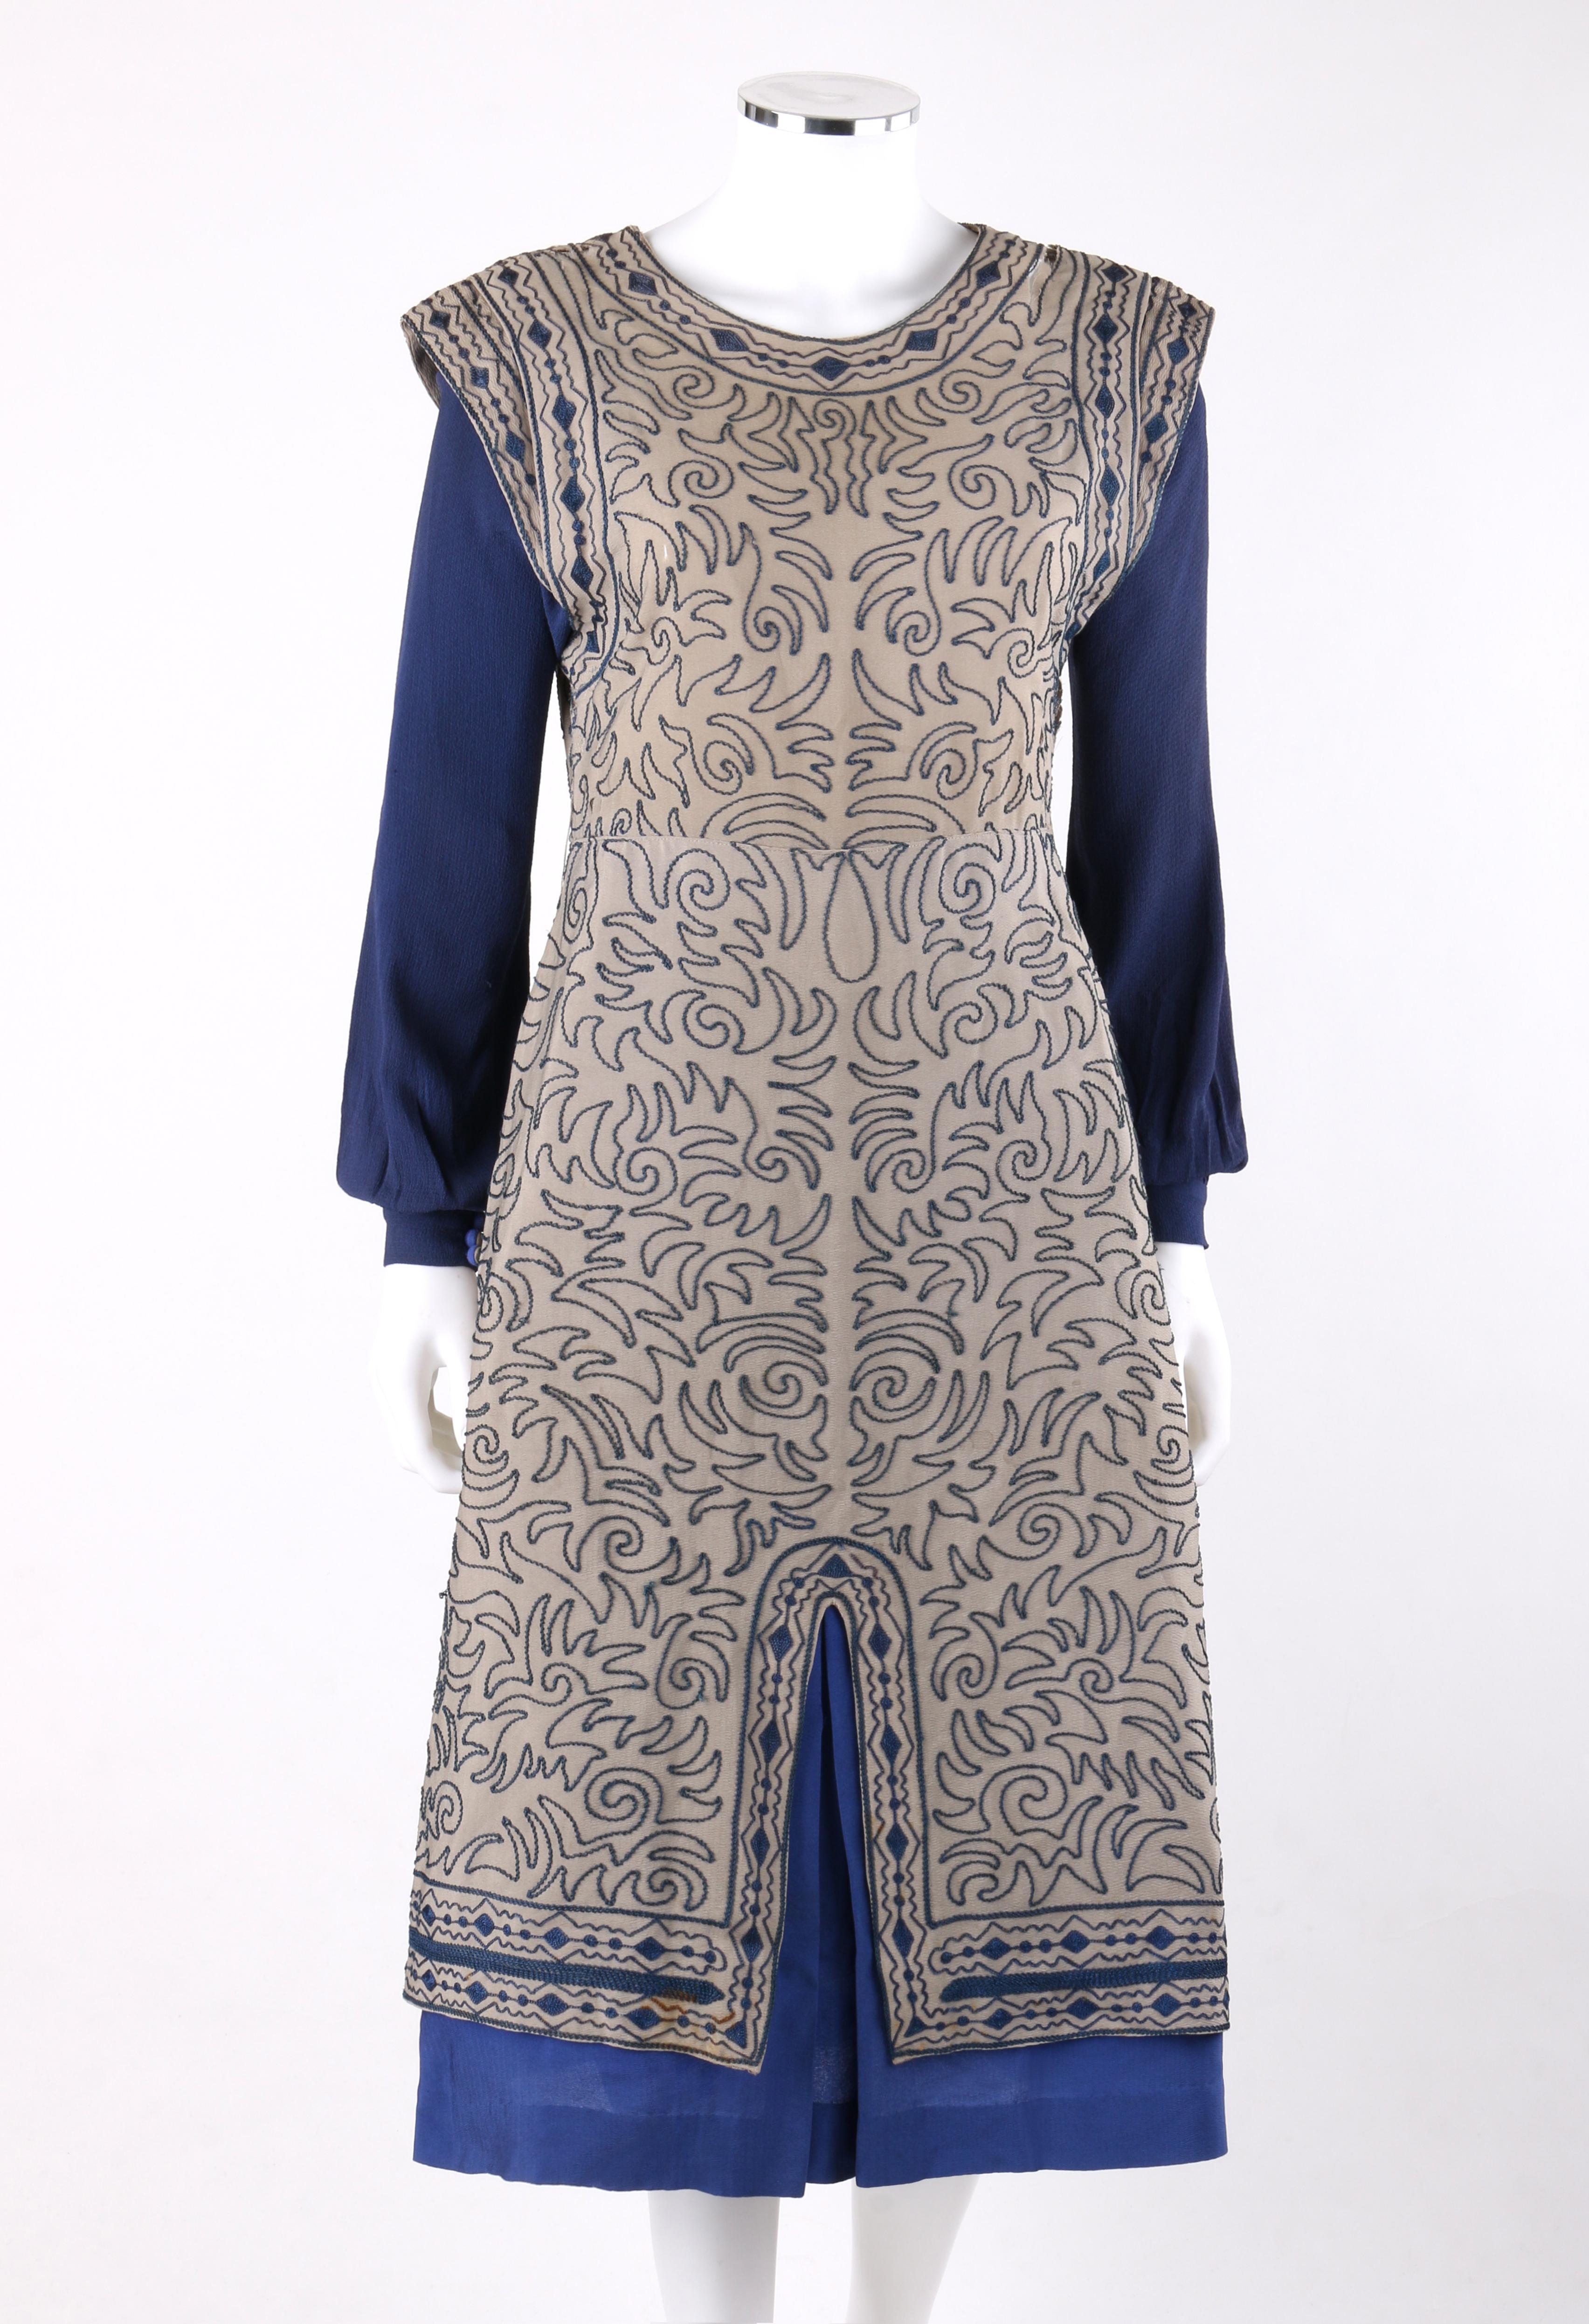 CLASSY JEAN c.1910’s Edwardian Satouche Embroidered Shell Silk Bishop Sleeve Midi Dress

Brand / Manufacturer: Classy Jean Dresses Inc
Circa: 1920’s 
Style: Midi Dress
Color(s): Shades of tan and blue
Lined: No 
Unmarked Fabric Content (feel of):